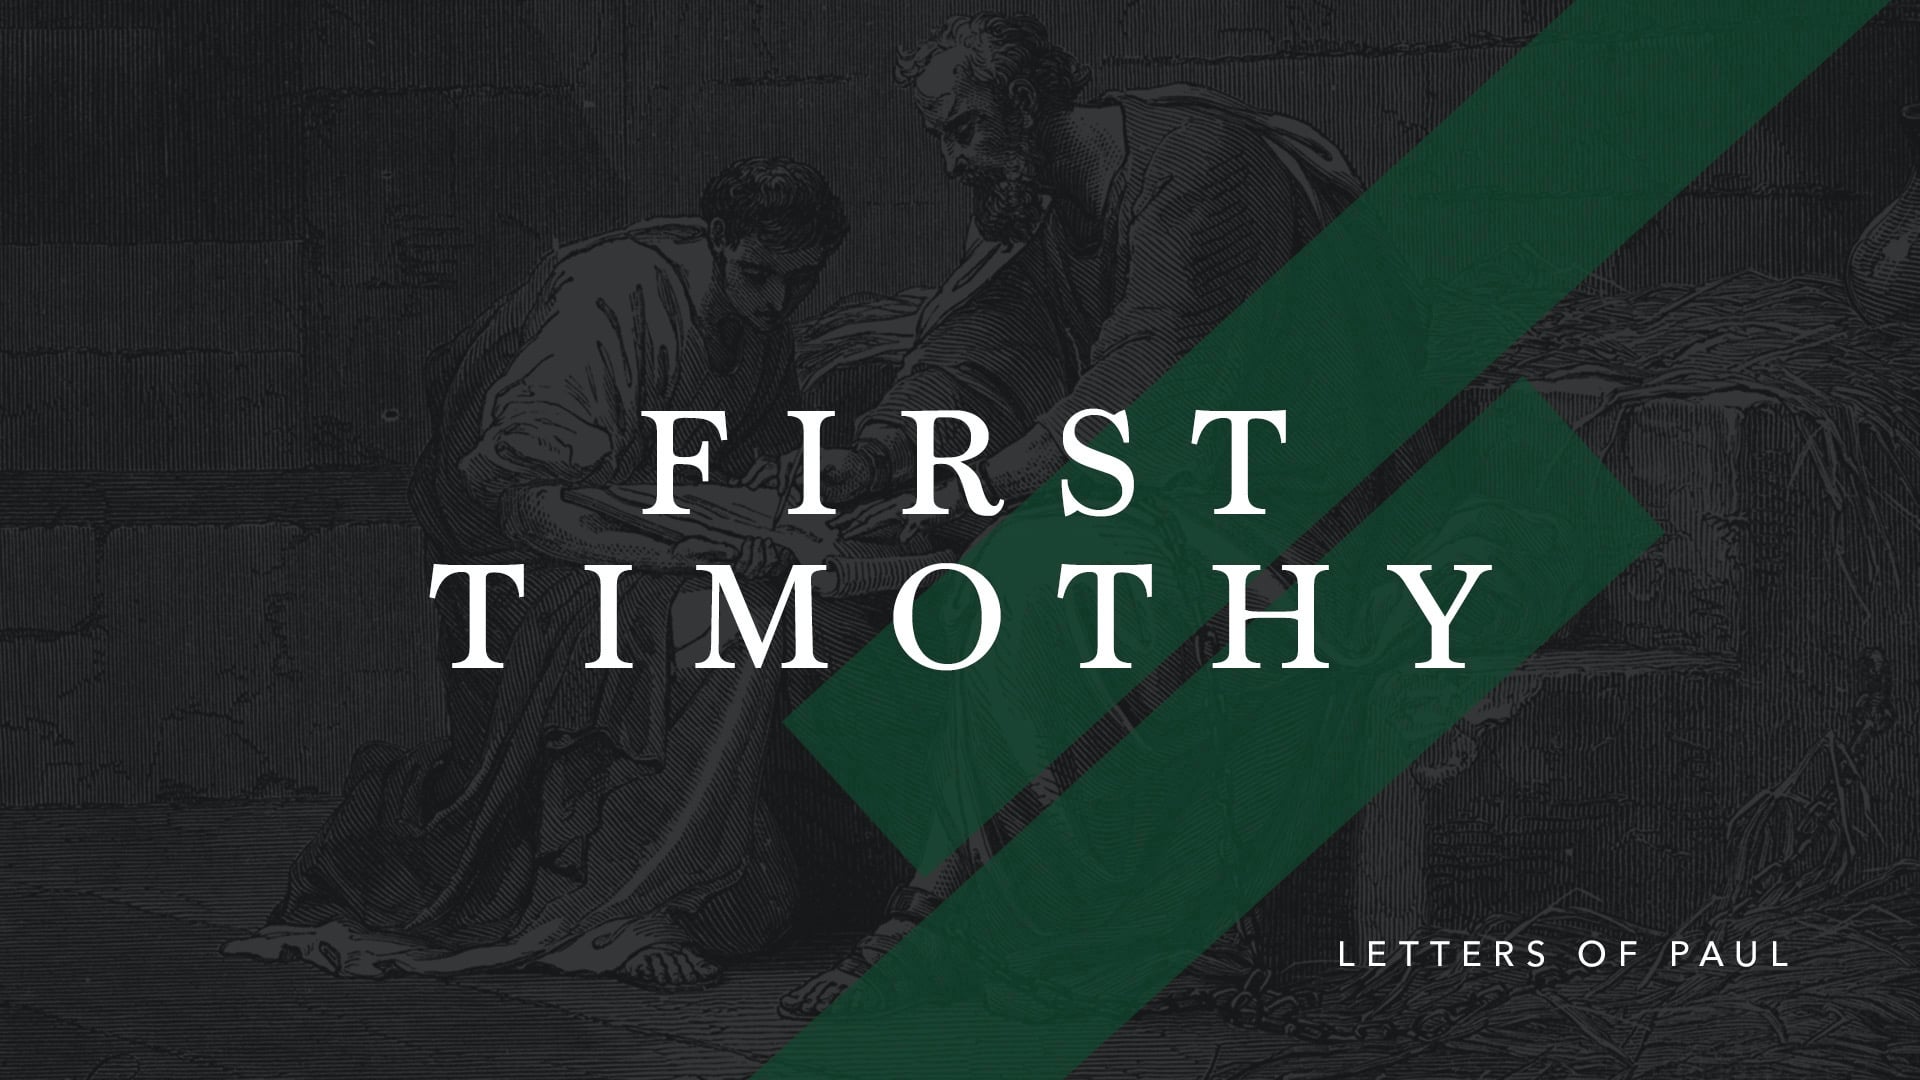 First Timothy: Slaves Honor Your Masters